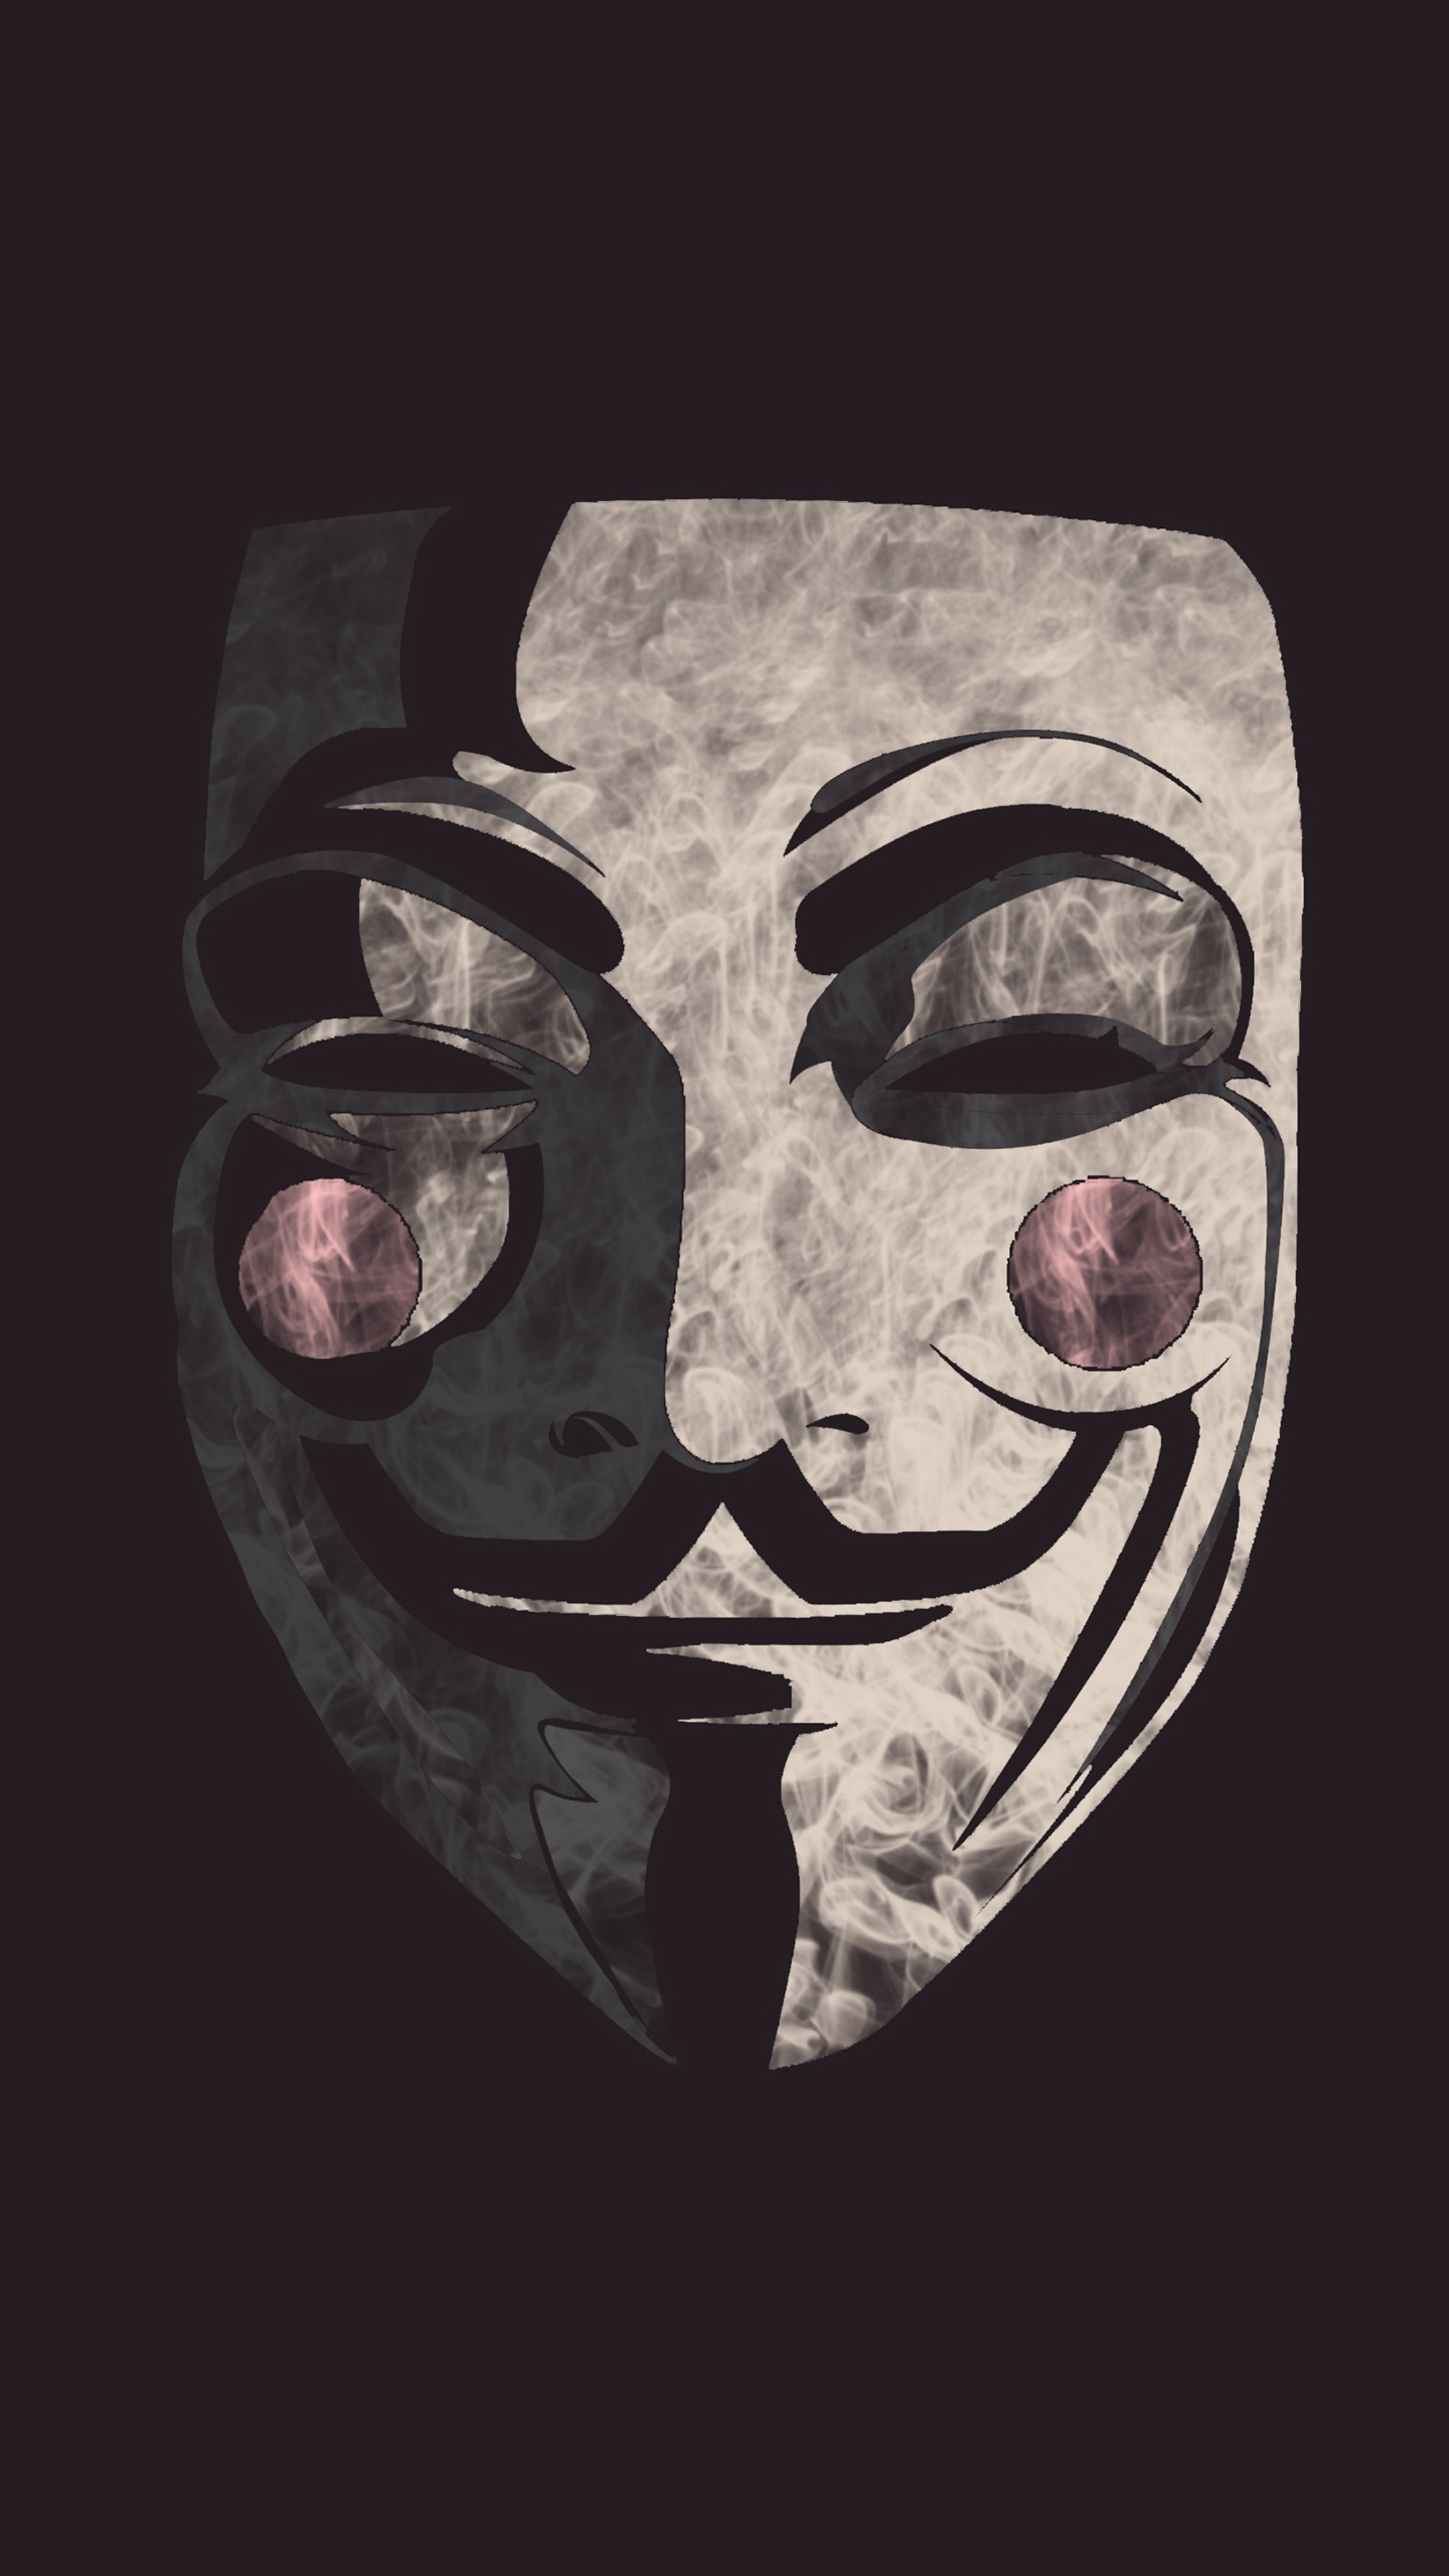 Guy Fawkes Mask: Was used in Project Chanology, the Occupy movement, Anonymous for the Voiceless. 2160x3840 4K Wallpaper.